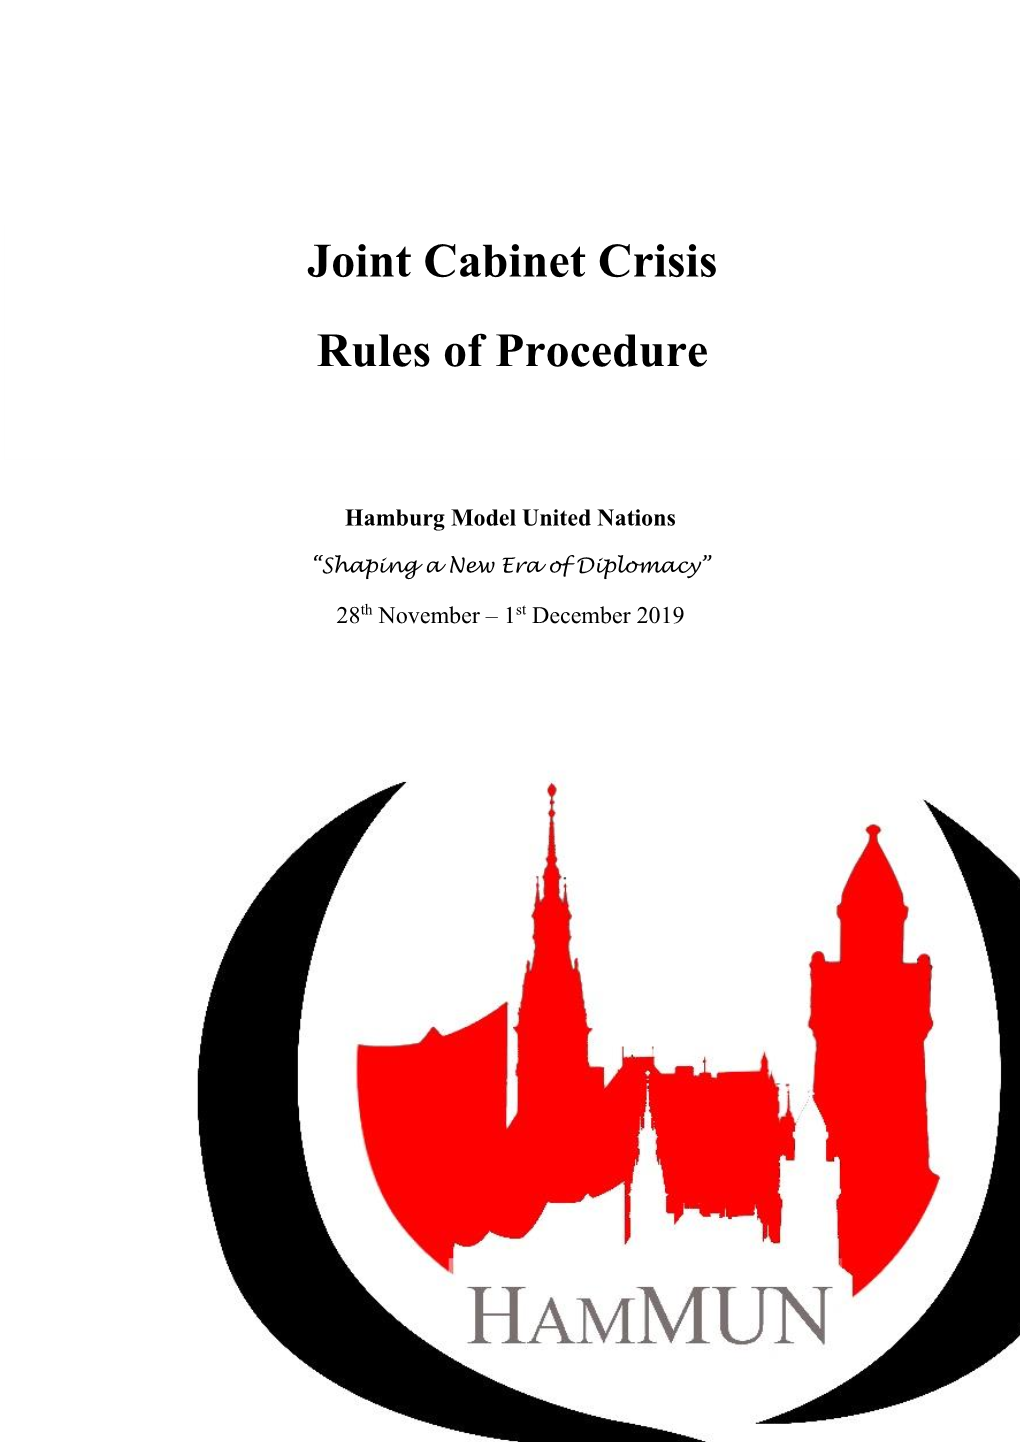 Joint Cabinet Crisis Rules of Procedure